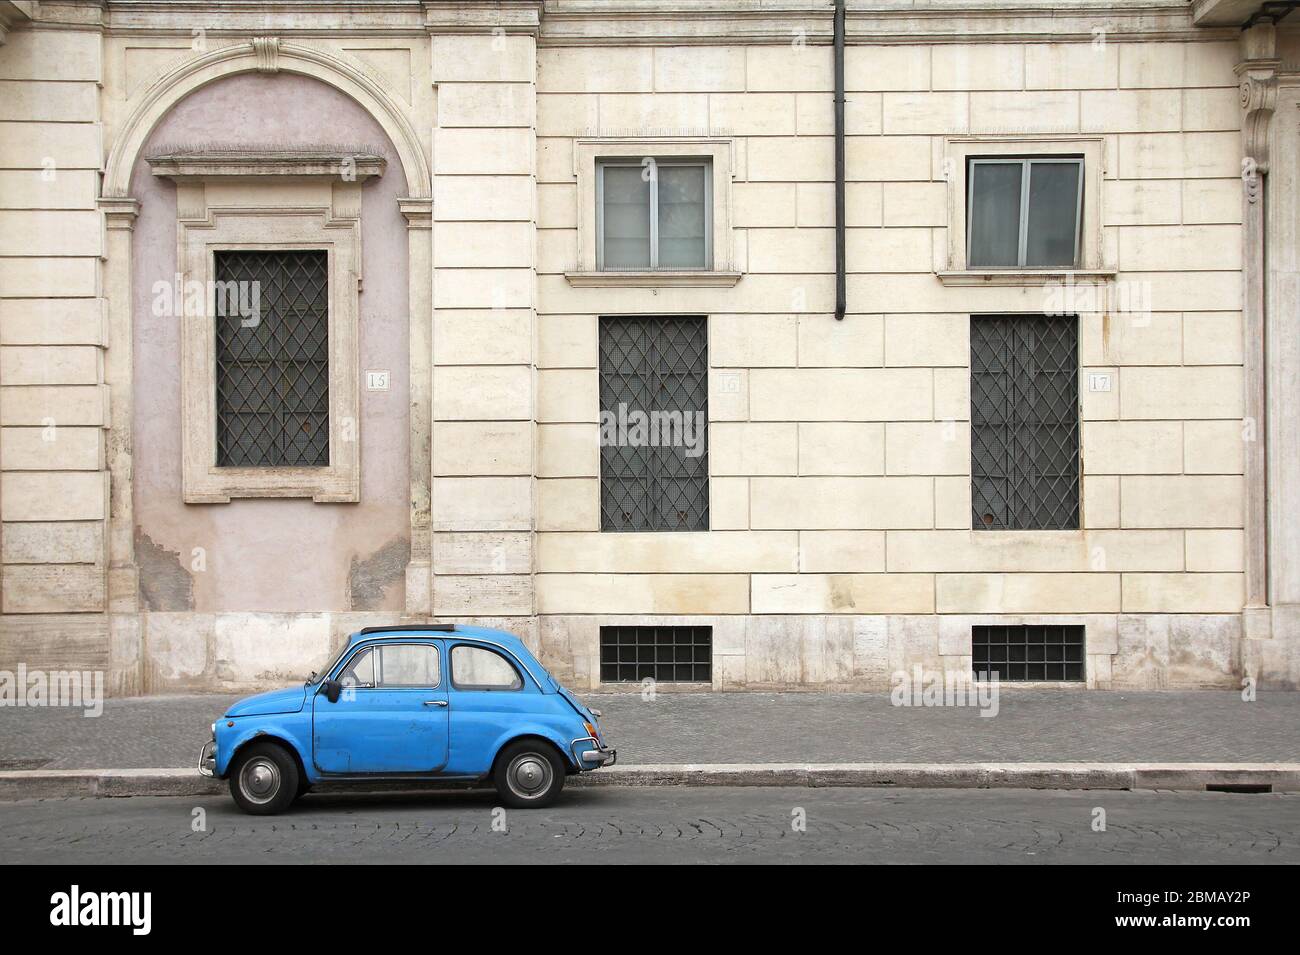 ROME - MAY 12: Fiat 500 parked on May 12, 2010 in Rome, Italy. With almost 4 million units sold, Fiat 500 is among Top 50 cars in automotive history. Stock Photo